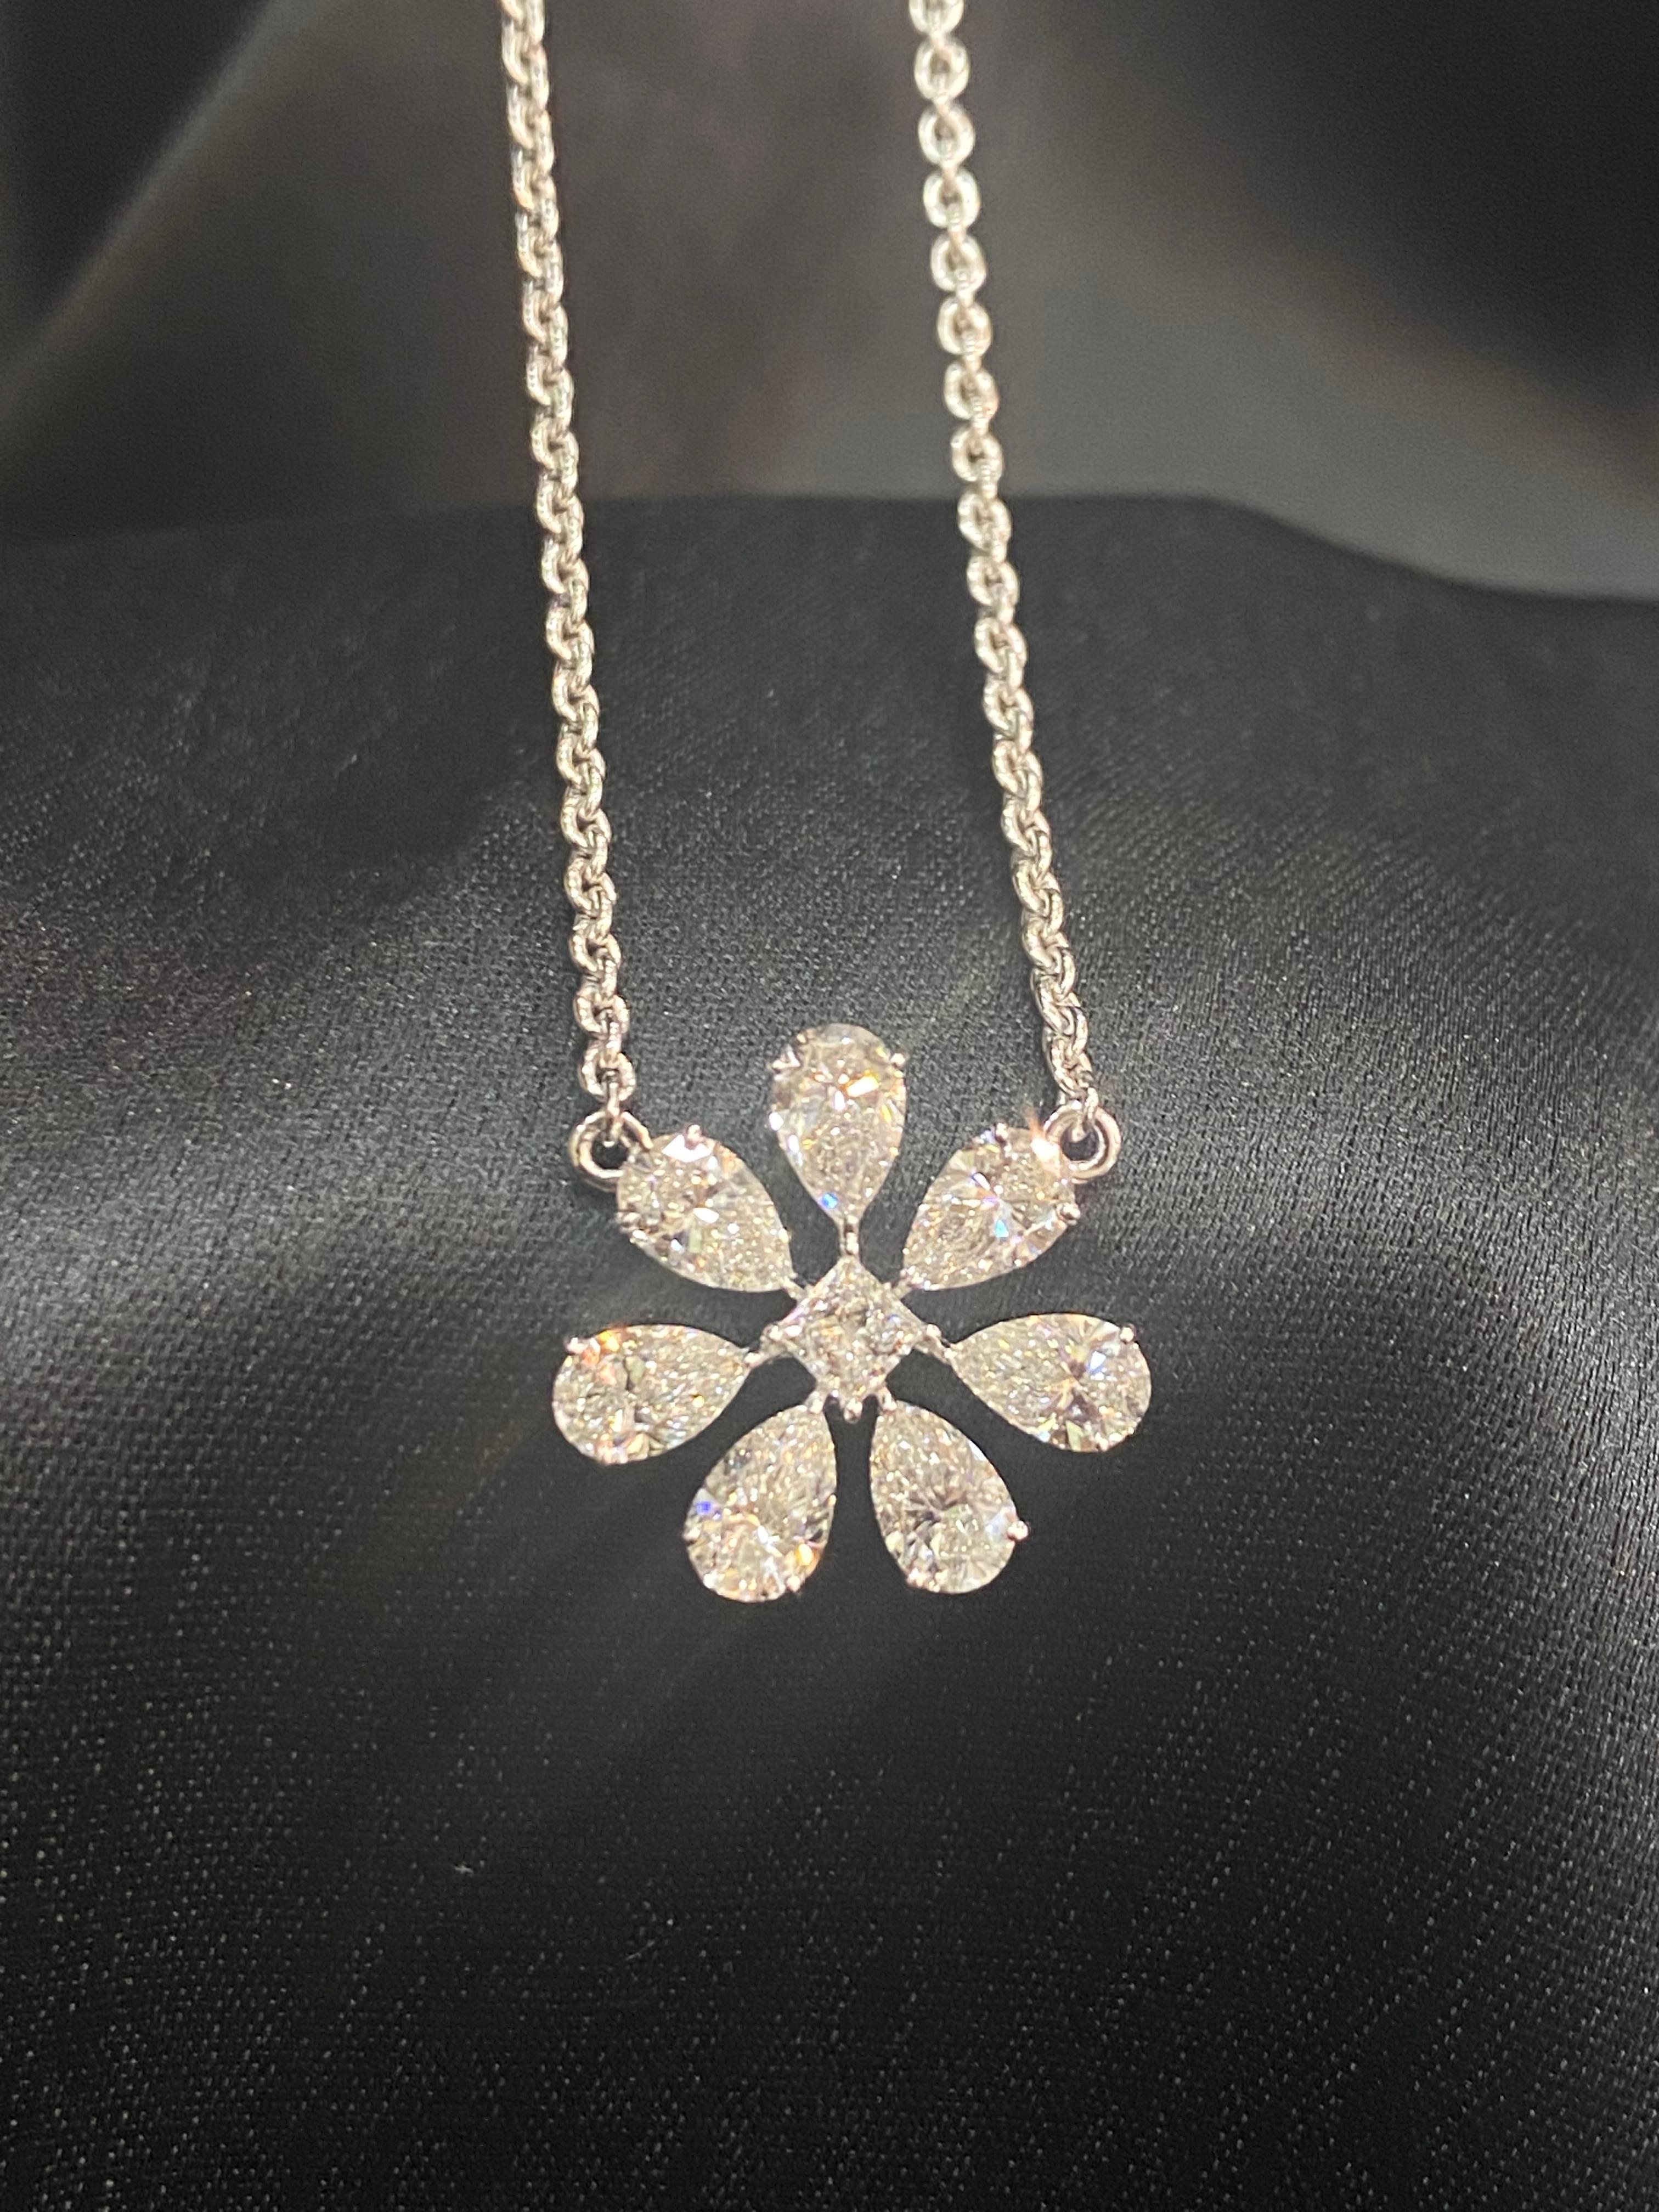 Pear Cut 2.25 Cts F/VS1 Pear Princess Diamonds Flower Necklace Authentic 14K White Gold For Sale